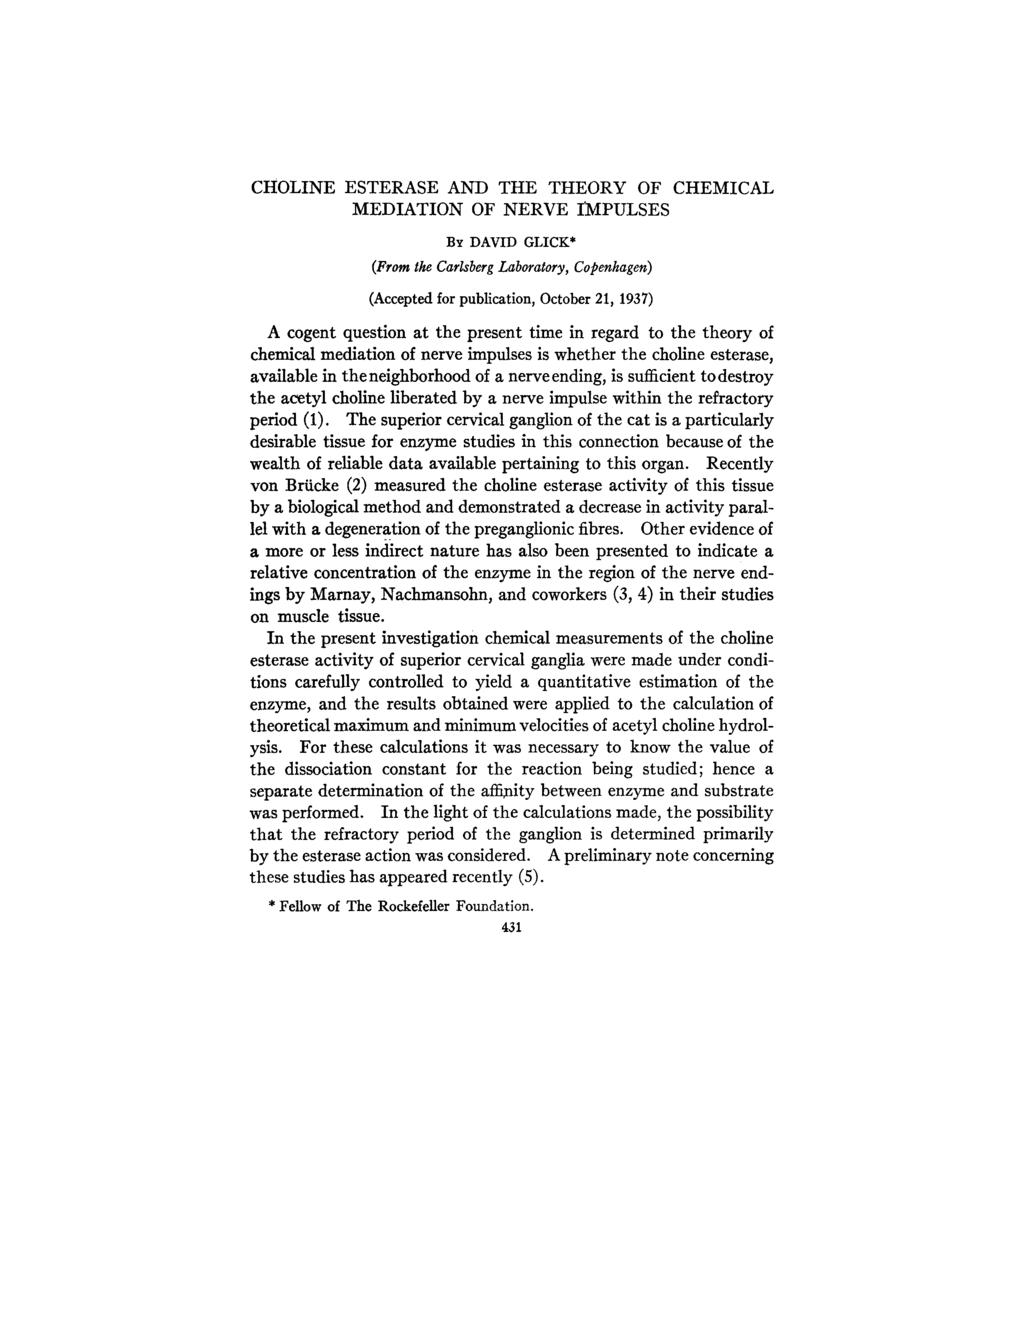 CHOLINE ESTERASE AND THE THEORY OF CHEMICAL MEDIATION OF NERVE rmpulses BY DAVID GLICK* (From the Cartsberg Laboratory, Copenhagen) (Accepted for publication, October 21, 1937) A cogent question at